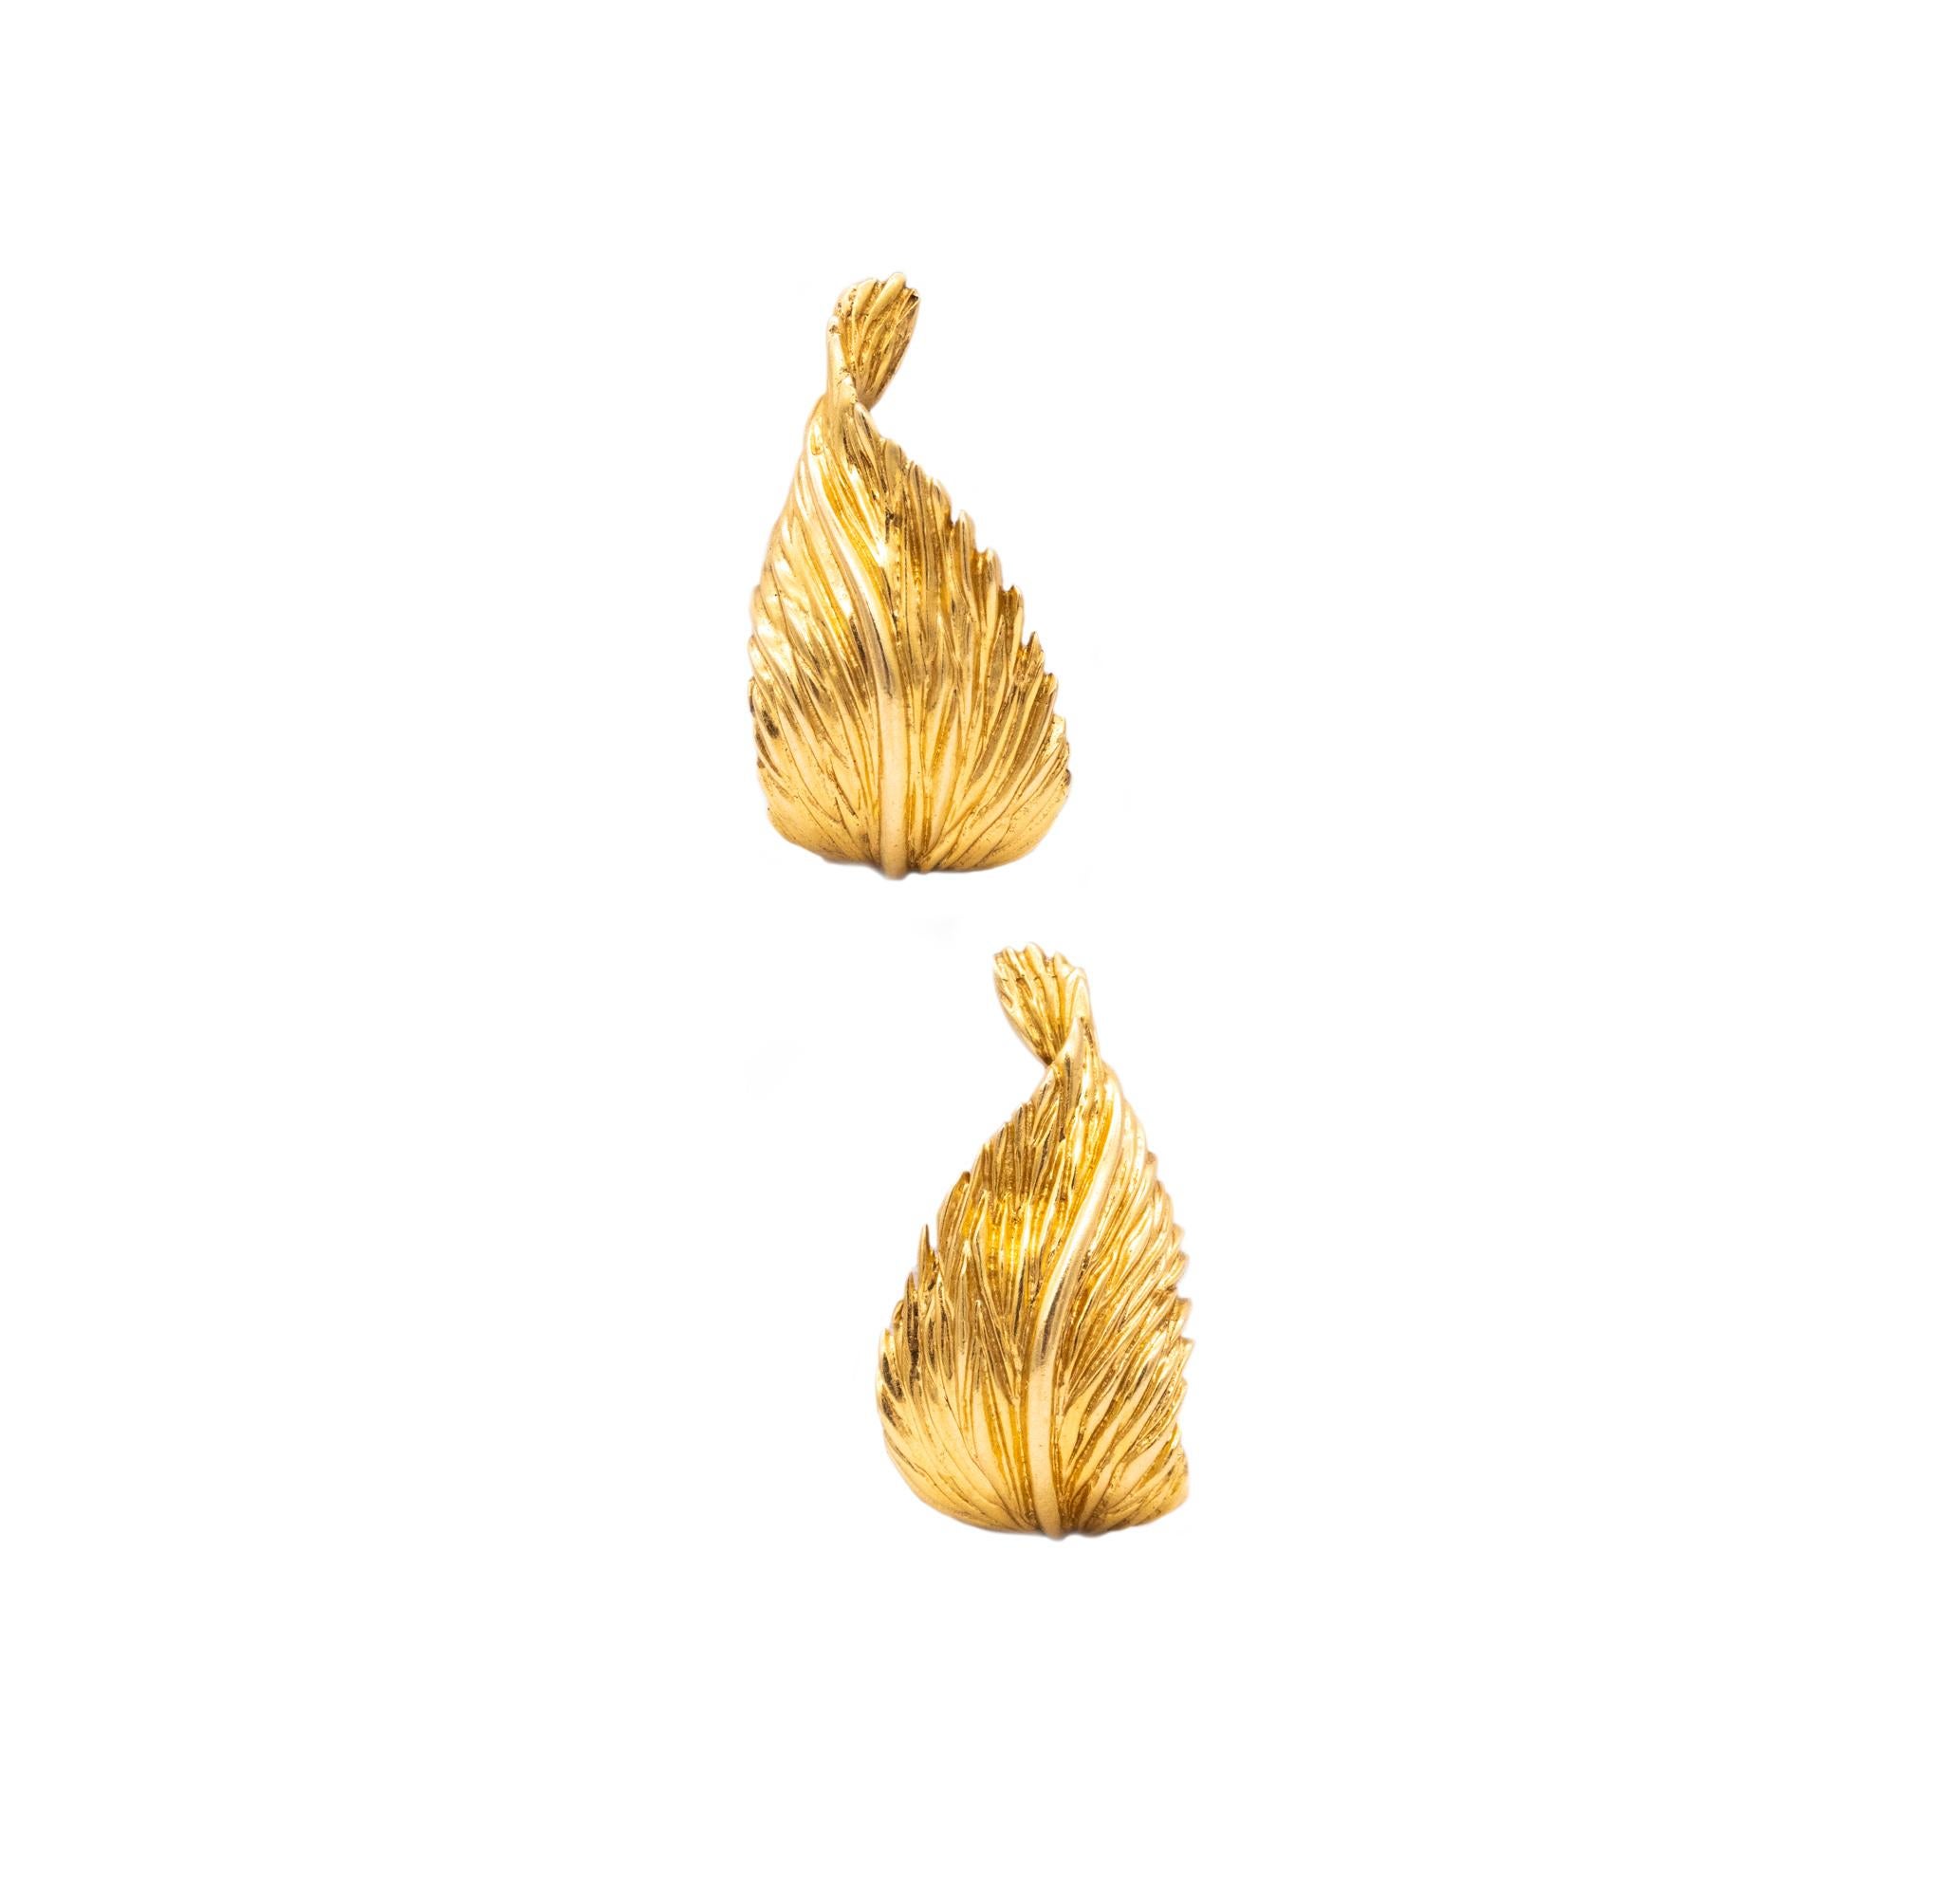 Unique pair of earrings created by Van Cleef & Arpels.

Beautiful vintage pieces from the French mid-century period, circa 1950-1960. These pair of clips-earrings was crafted in Paris, France by the house of Van Cleef & Arpels. Made, with an organic